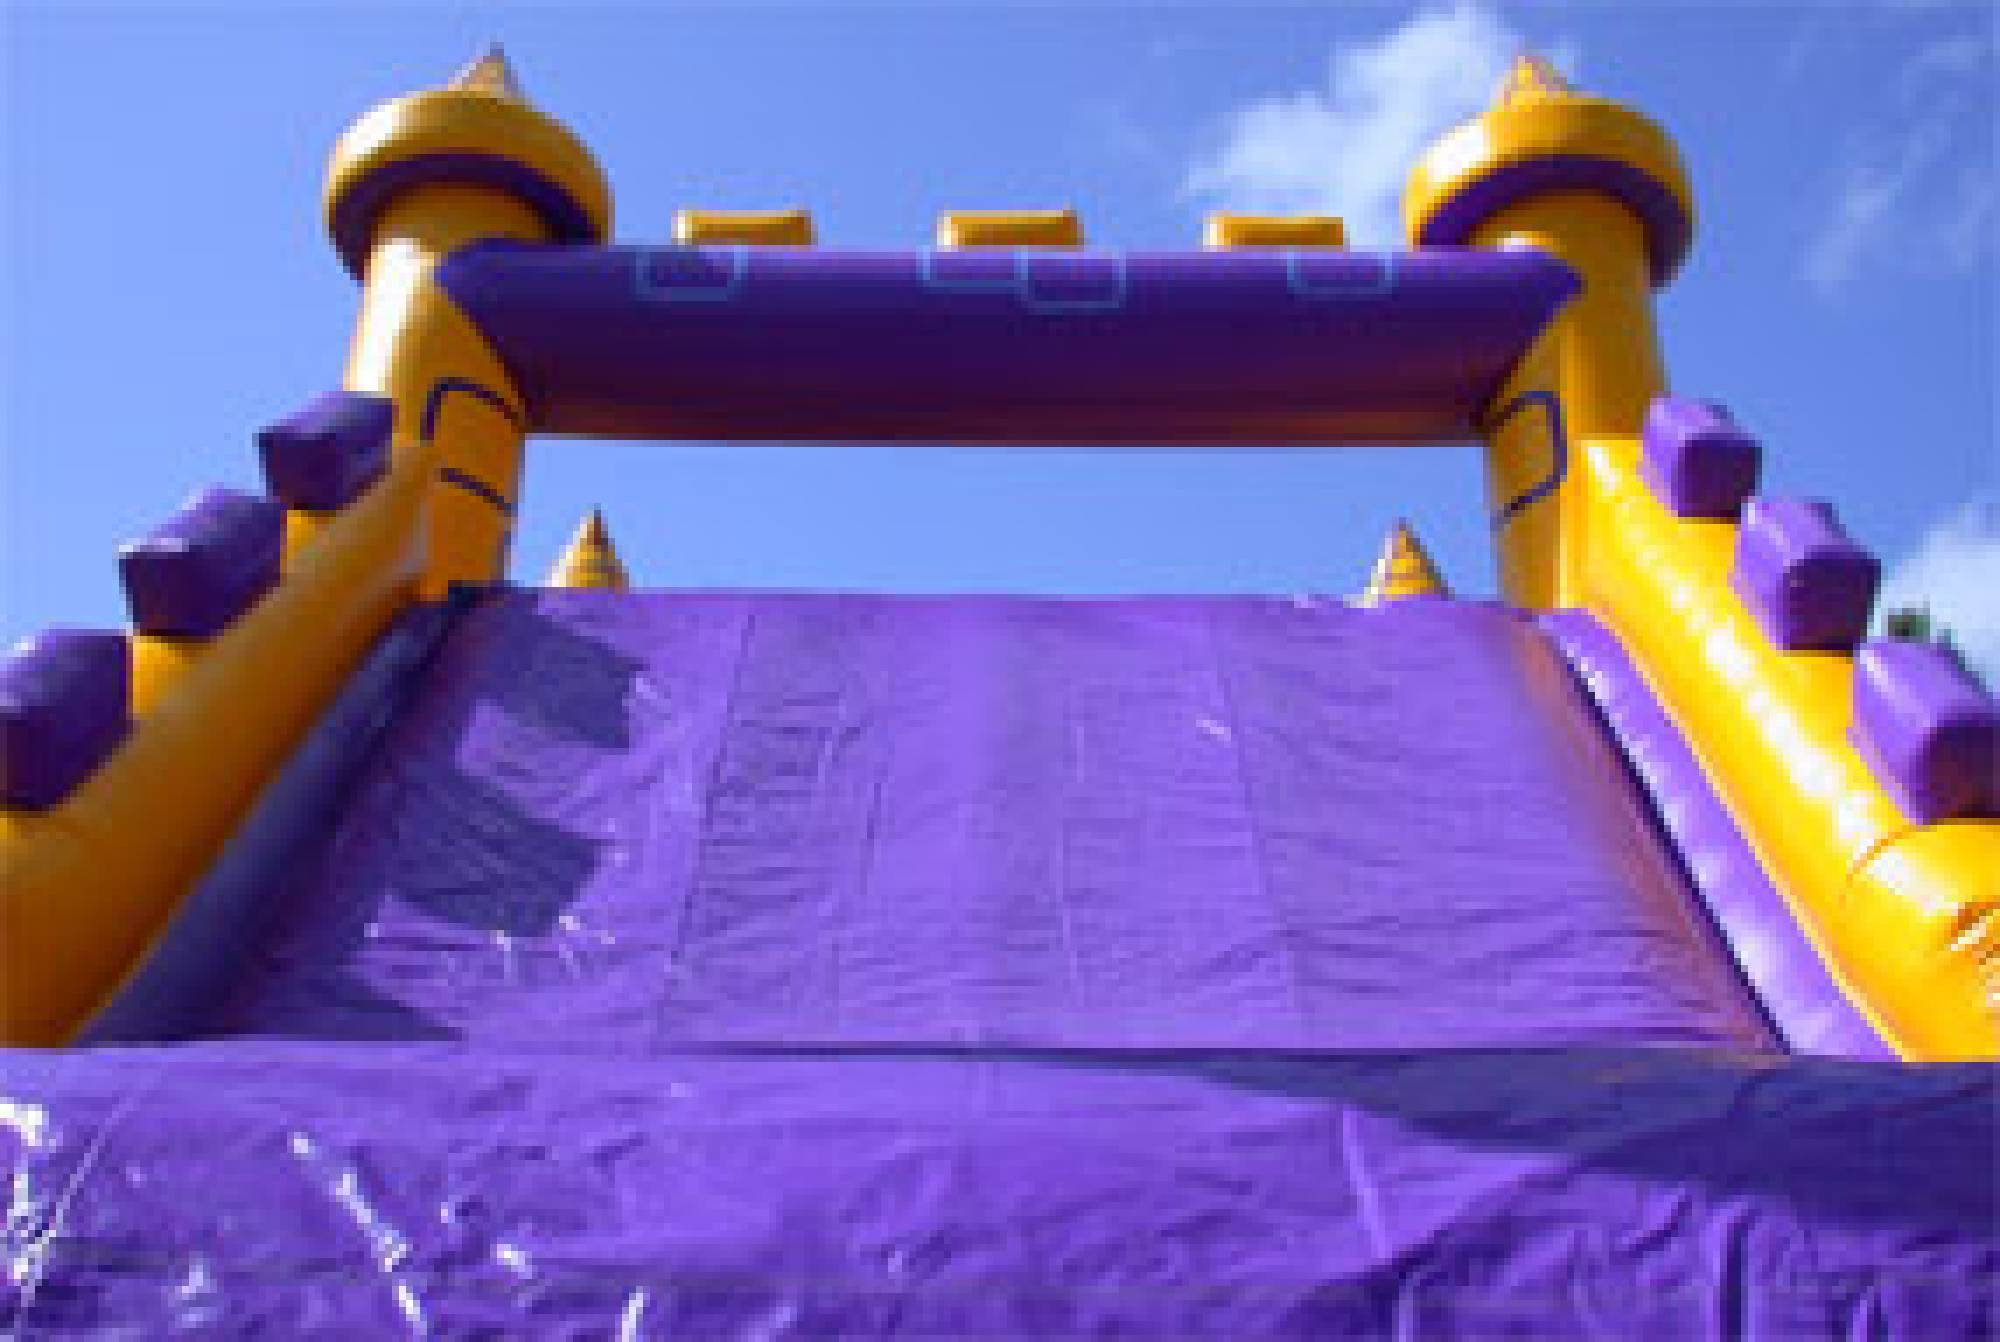 A view of the slide on the Knight Run inflatable obstacle course